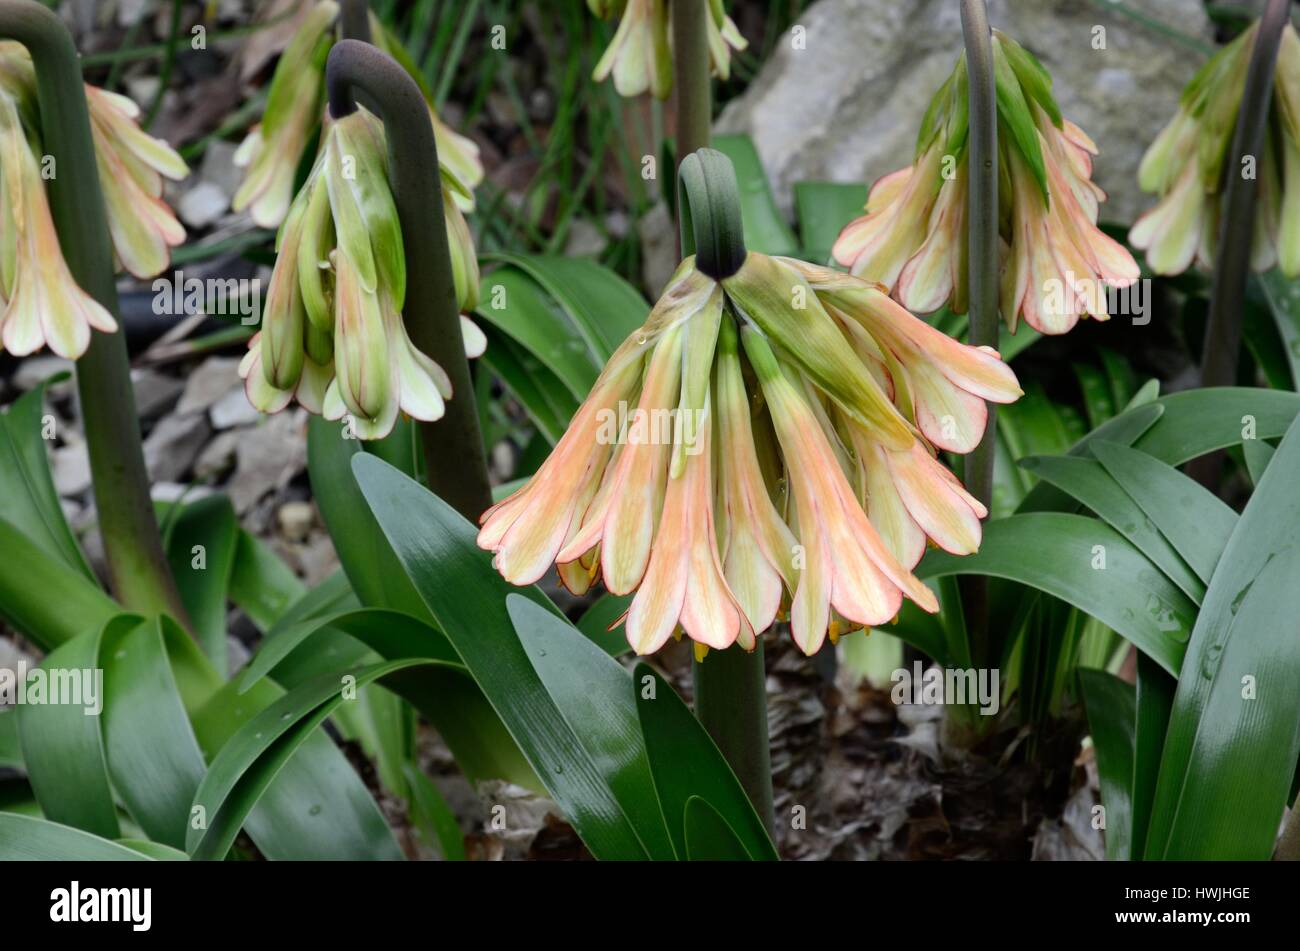 Cyrtanthus falcatus or falcate fire lily flower flowers Stock Photo